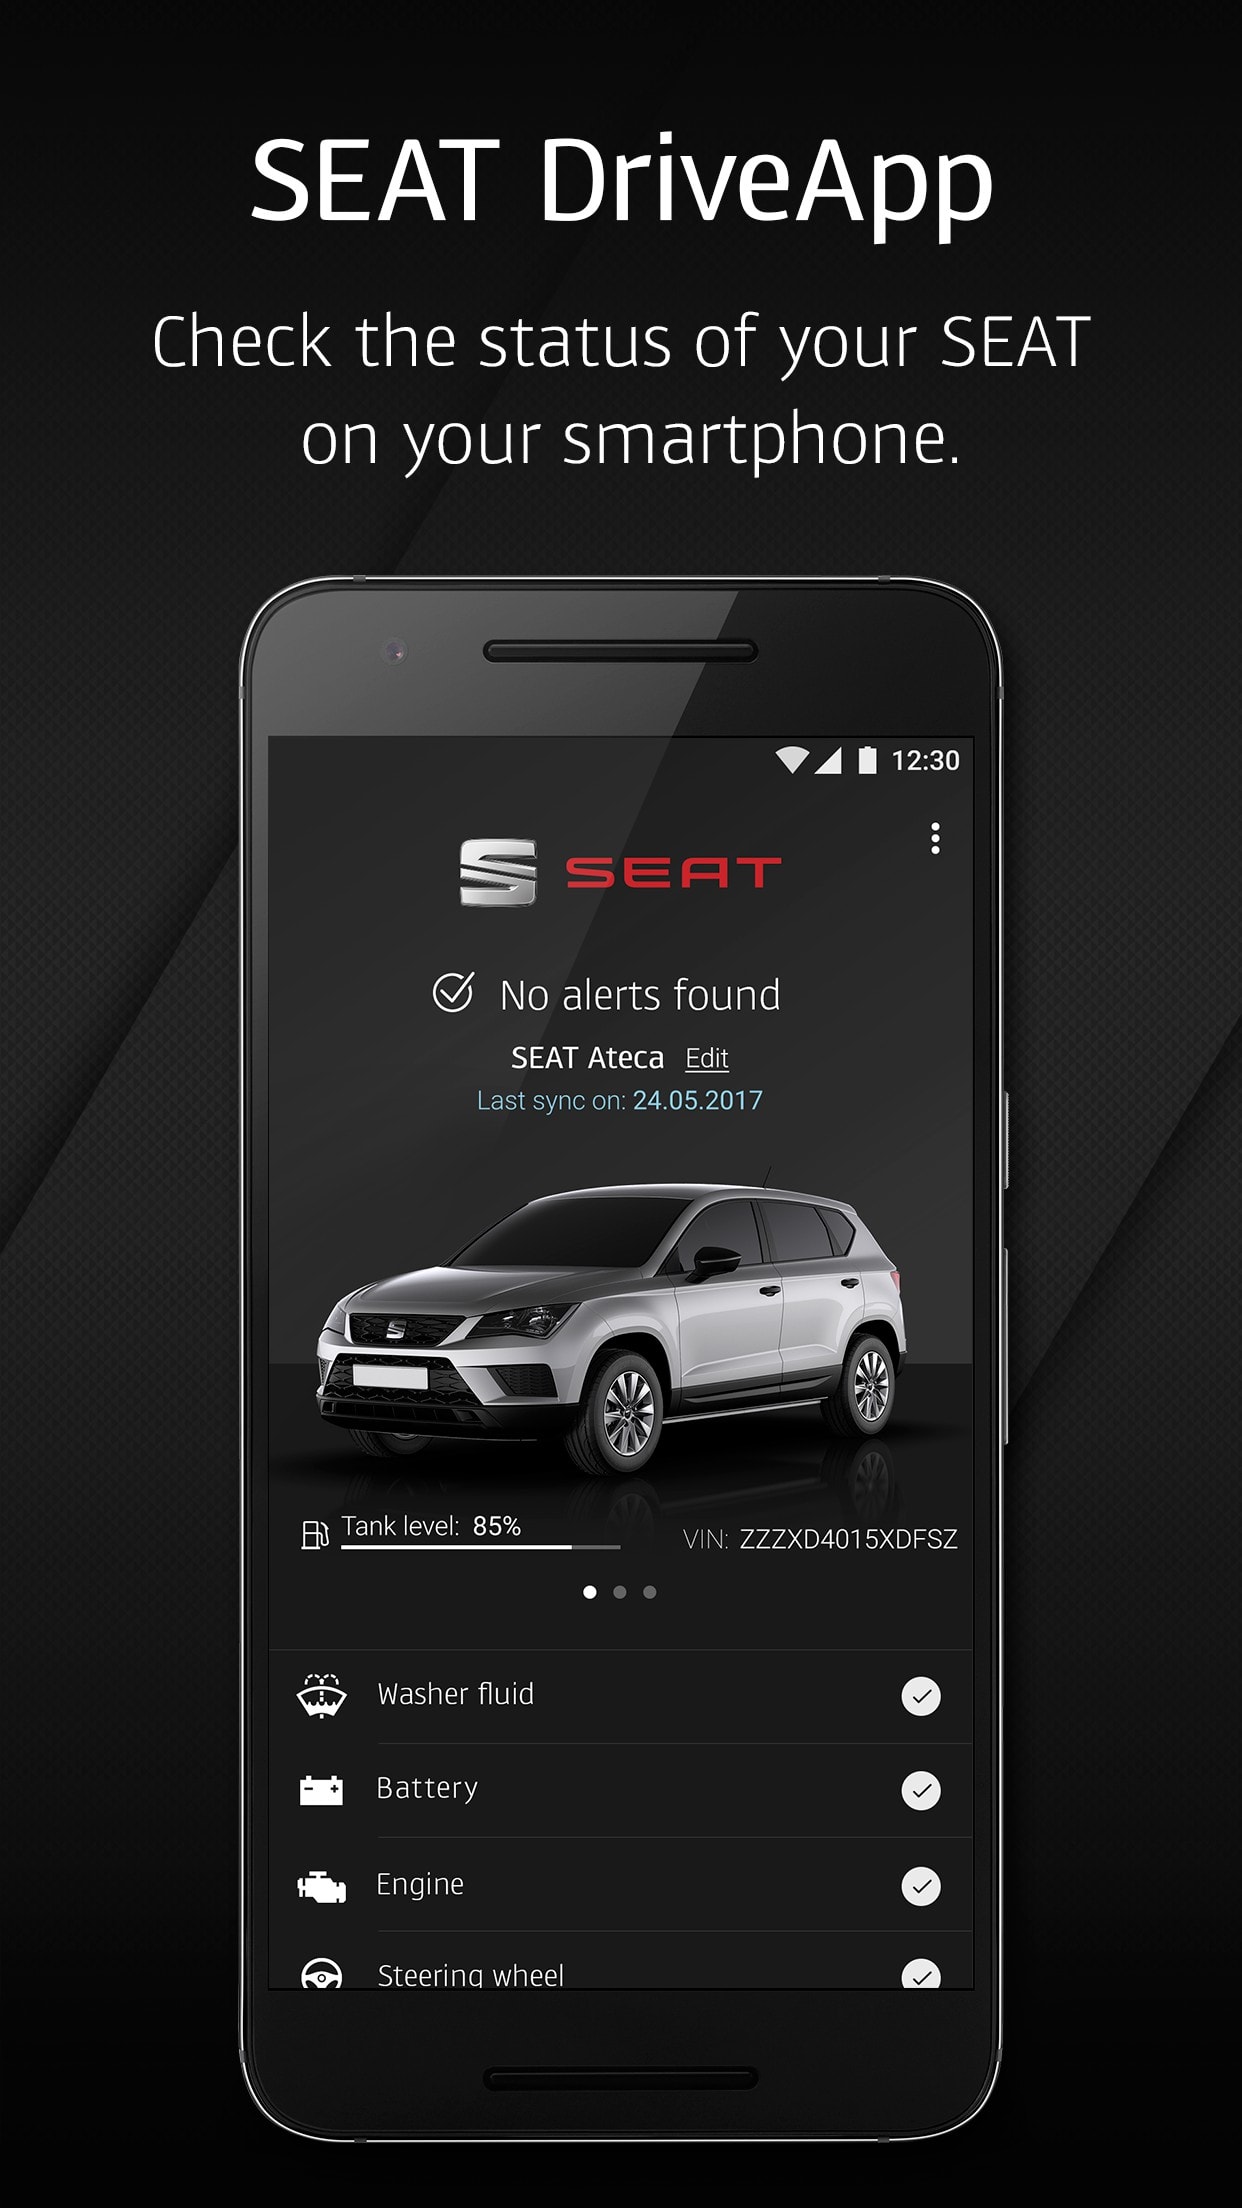 SEAT Introduces Android Auto-capable DriveApp in Google Play Store